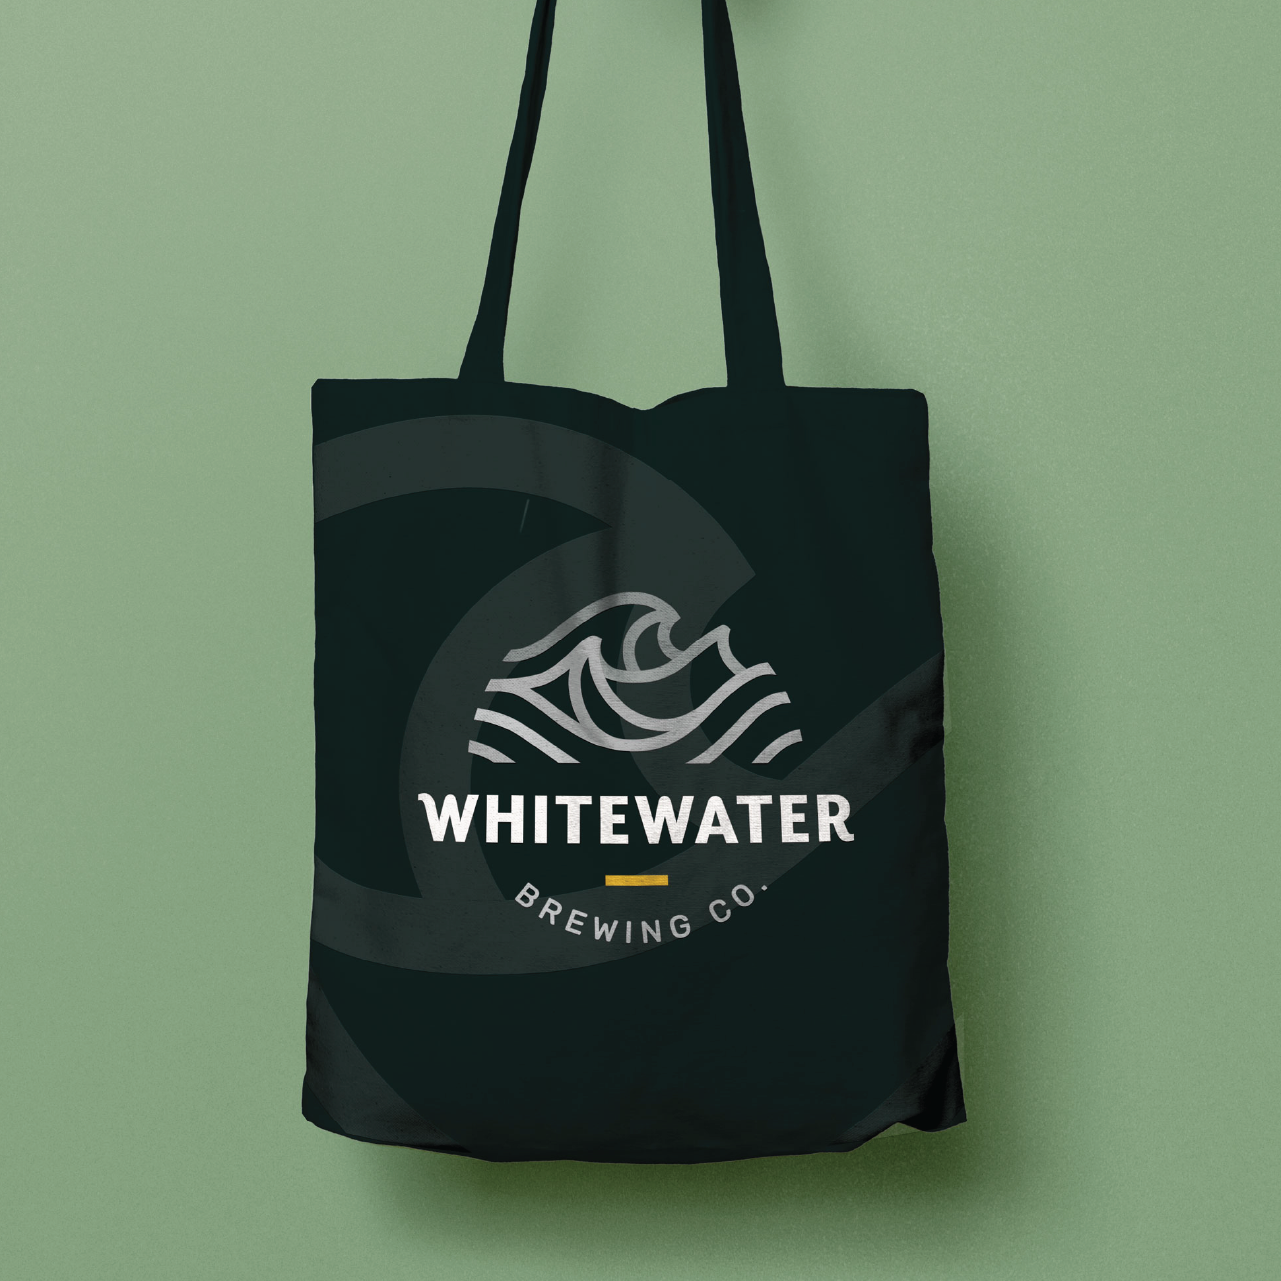 Whitewater tote bag